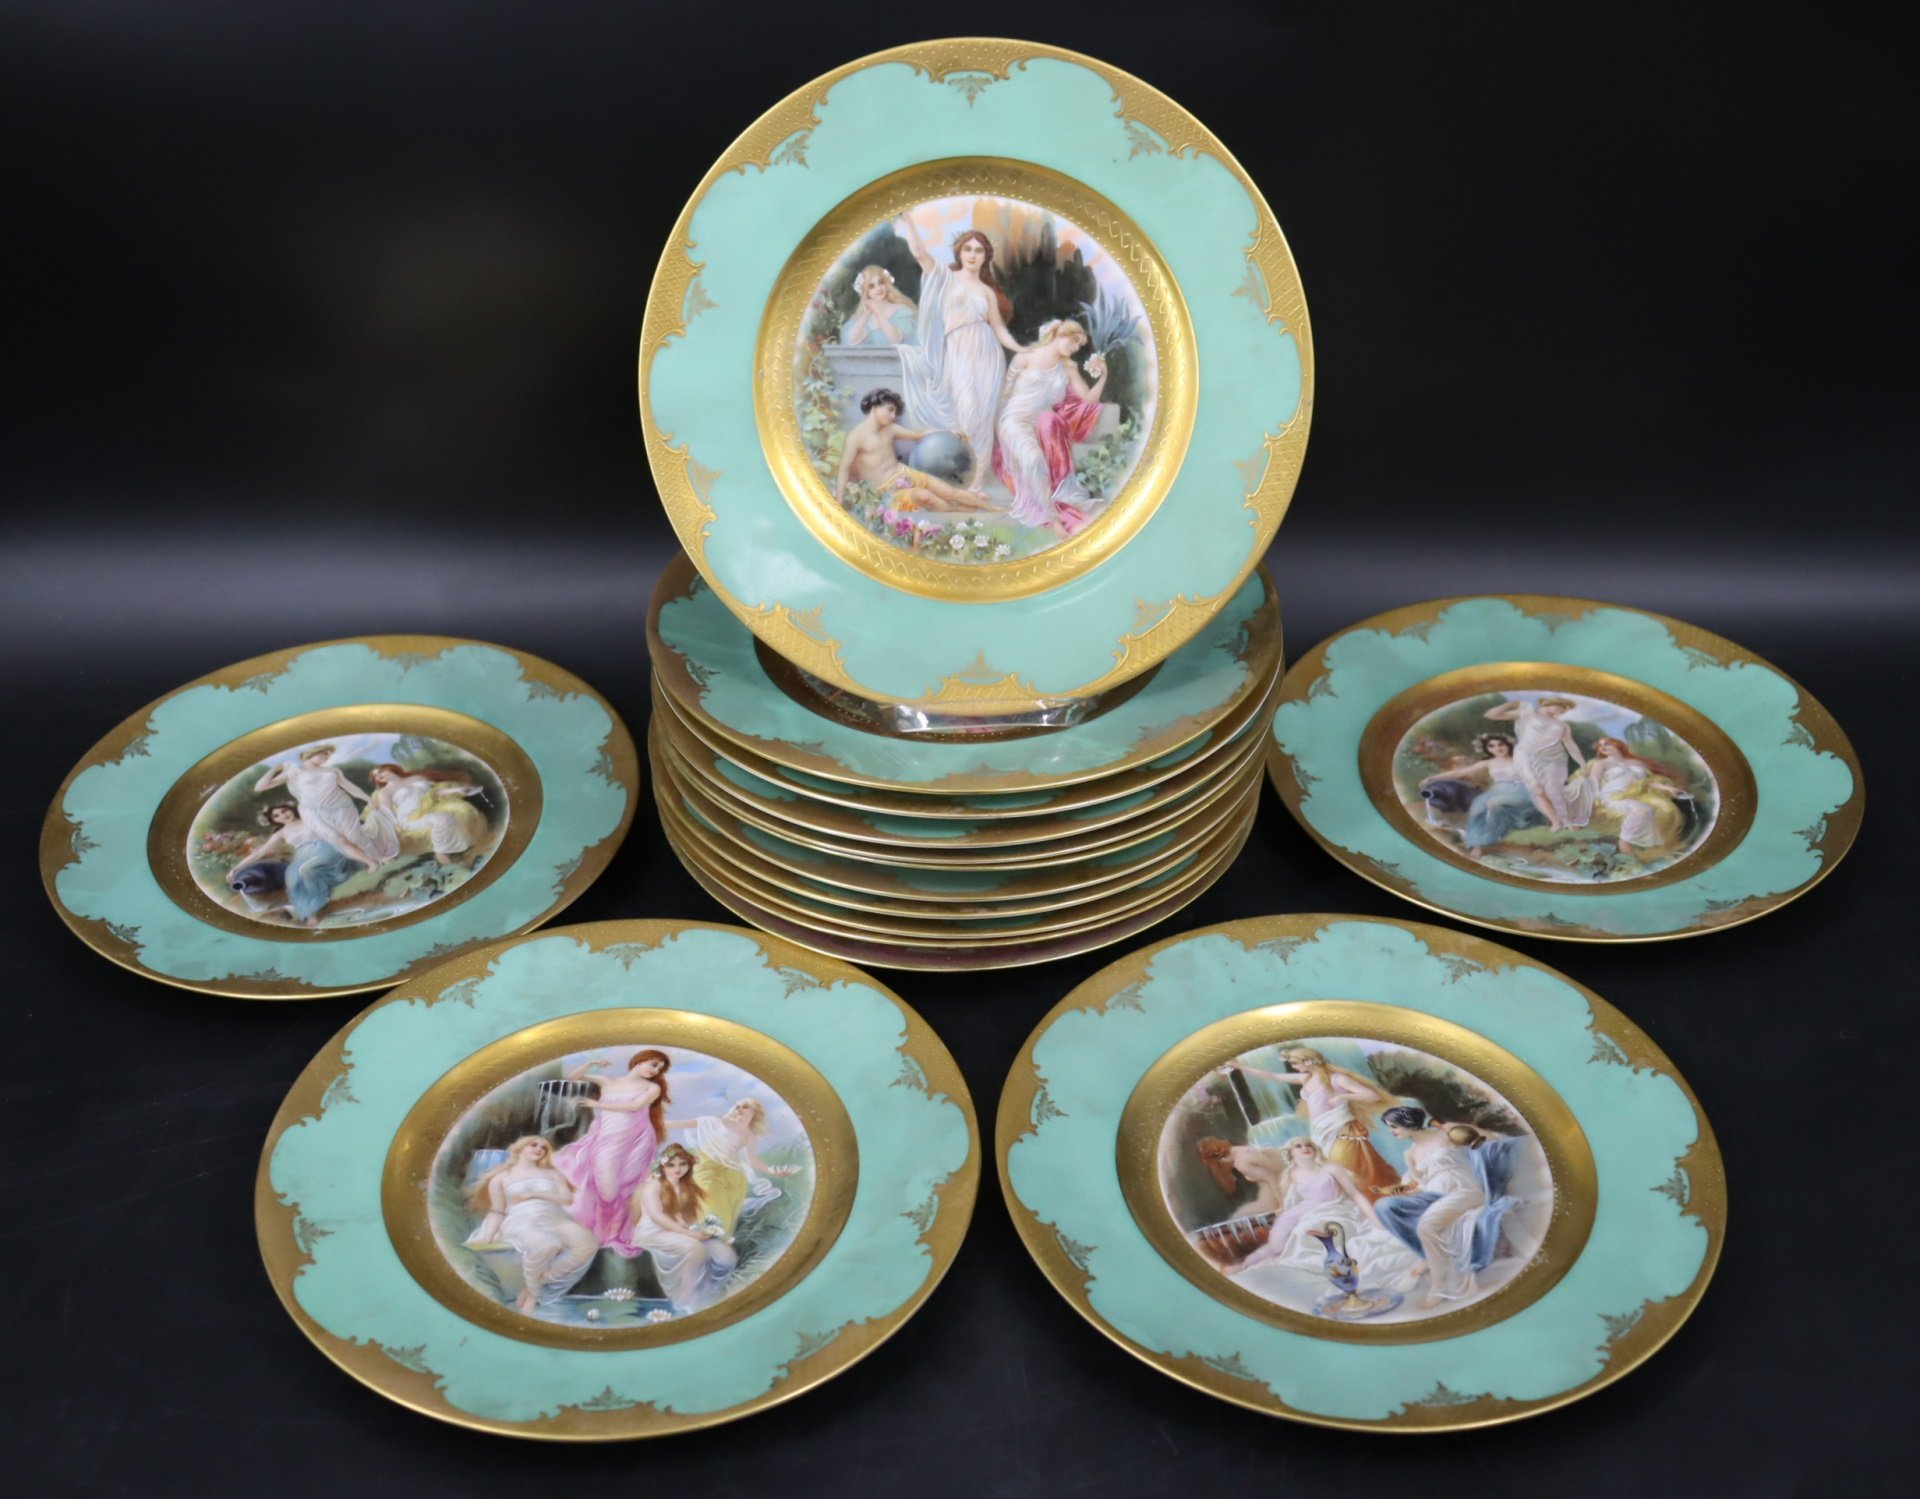 12 VIENNA STYLE DECORATED PORCELAIN